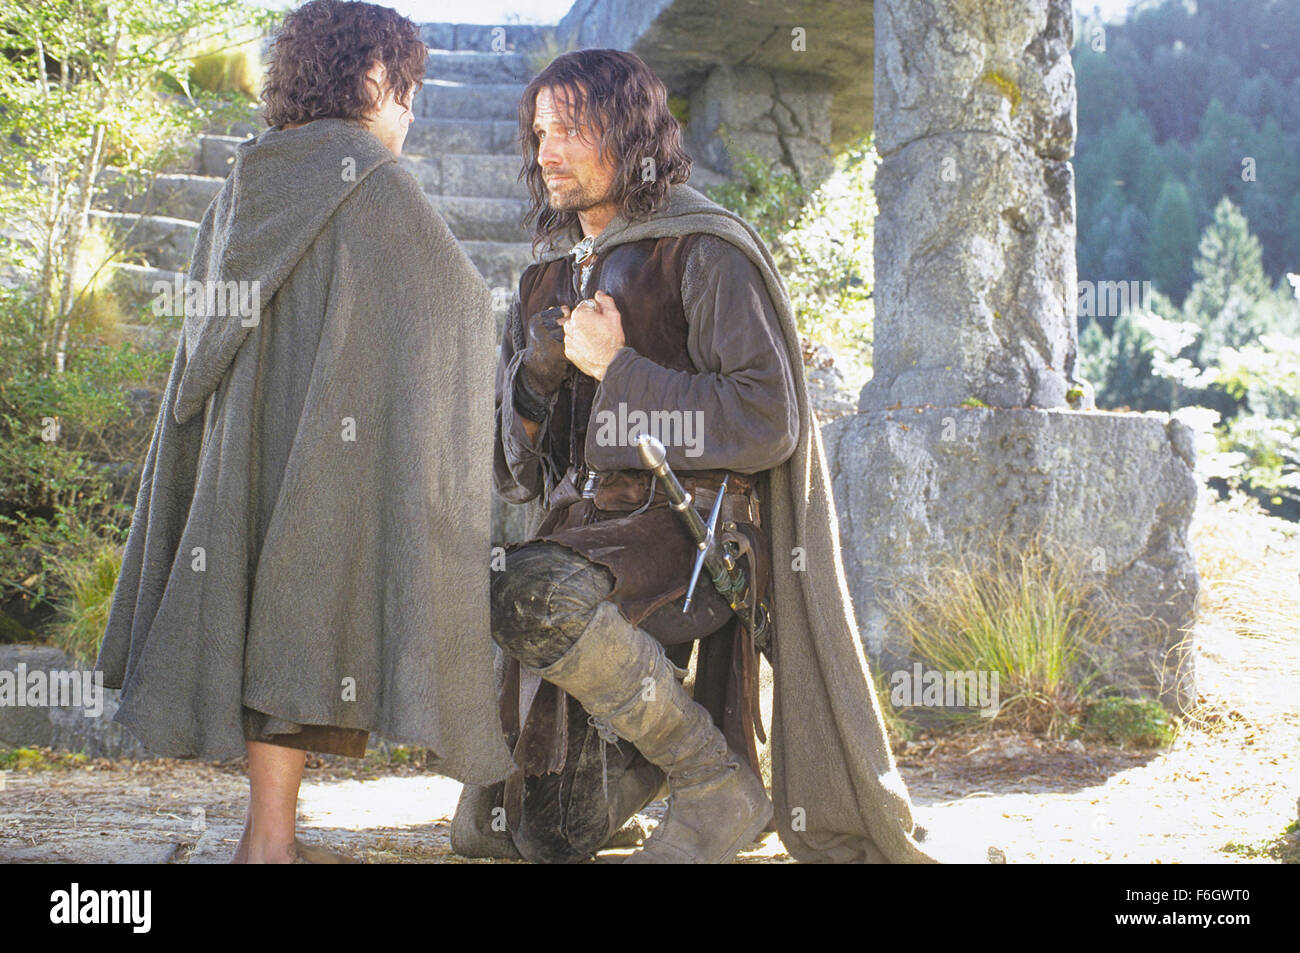 Apr 05, 2001; Hollywood, CA, USA; Image from Peter Jackson's spectacular film 'Lord of the Rings' starring VIGGO MORTENSON as Aragorn and ELIJAH WOOD as Frodo Baggins. Stock Photo